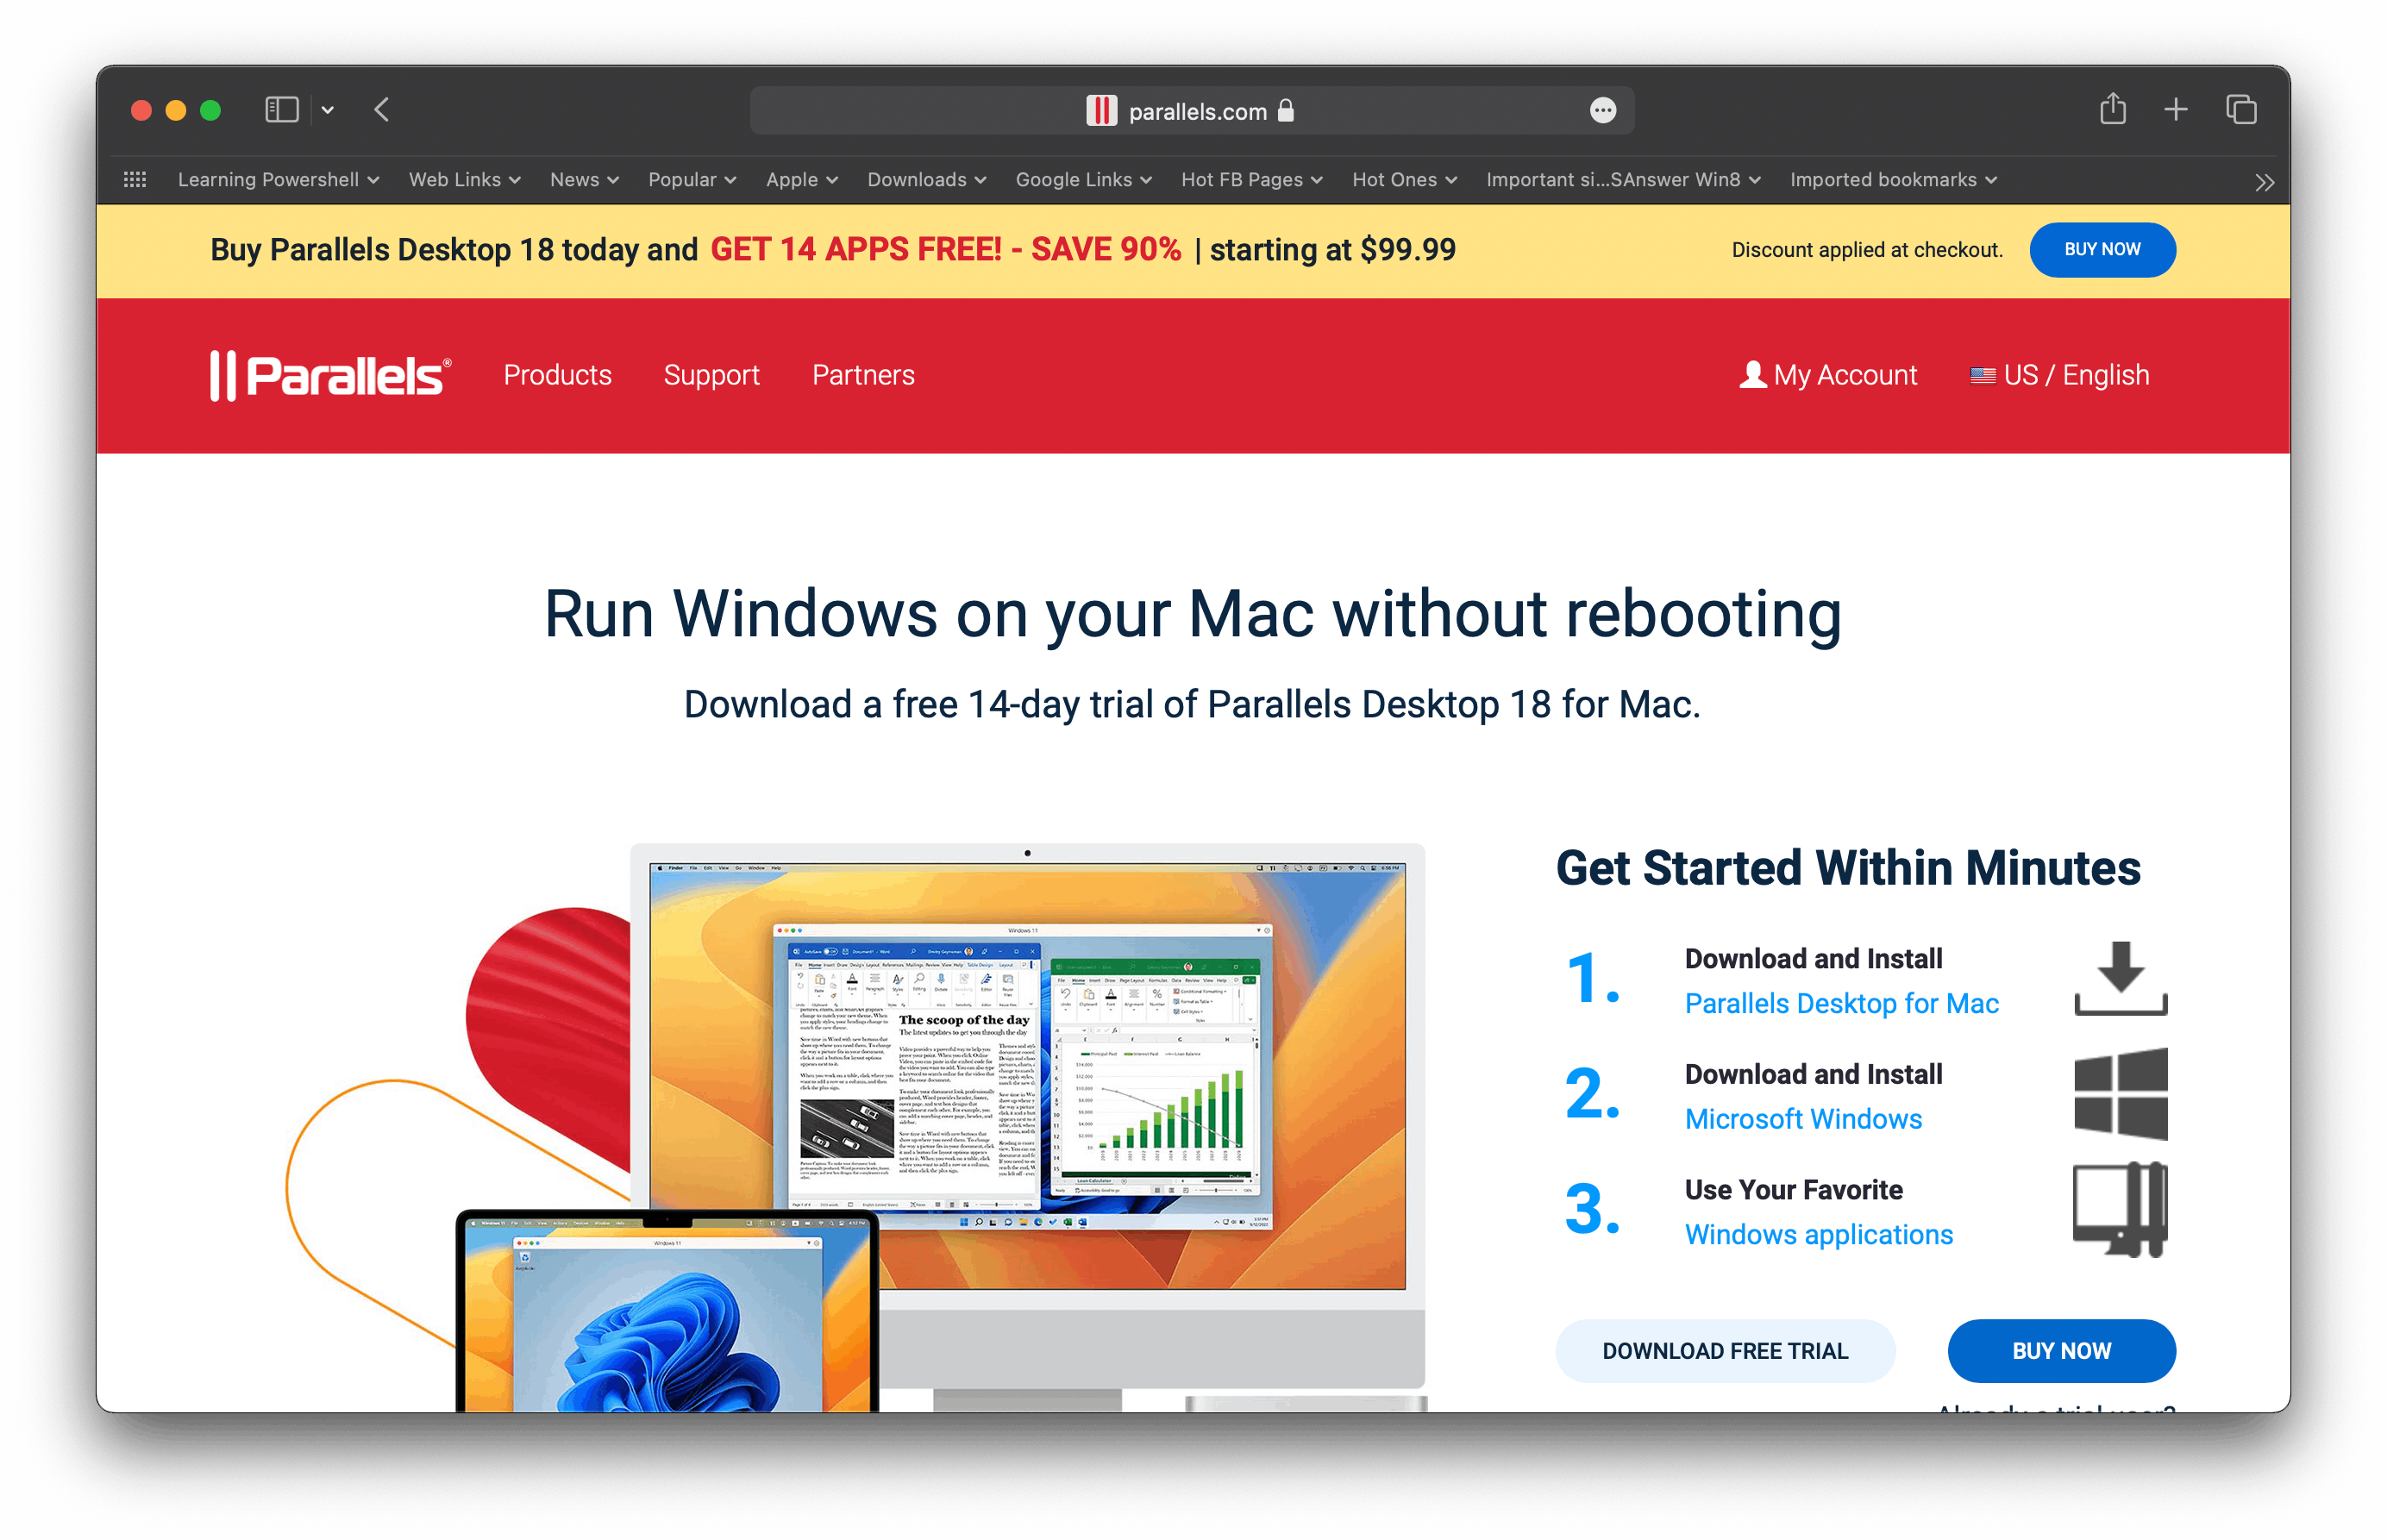 Microsoft to Officially Support Running Windows 11 on Apple M1 and M2 Macs